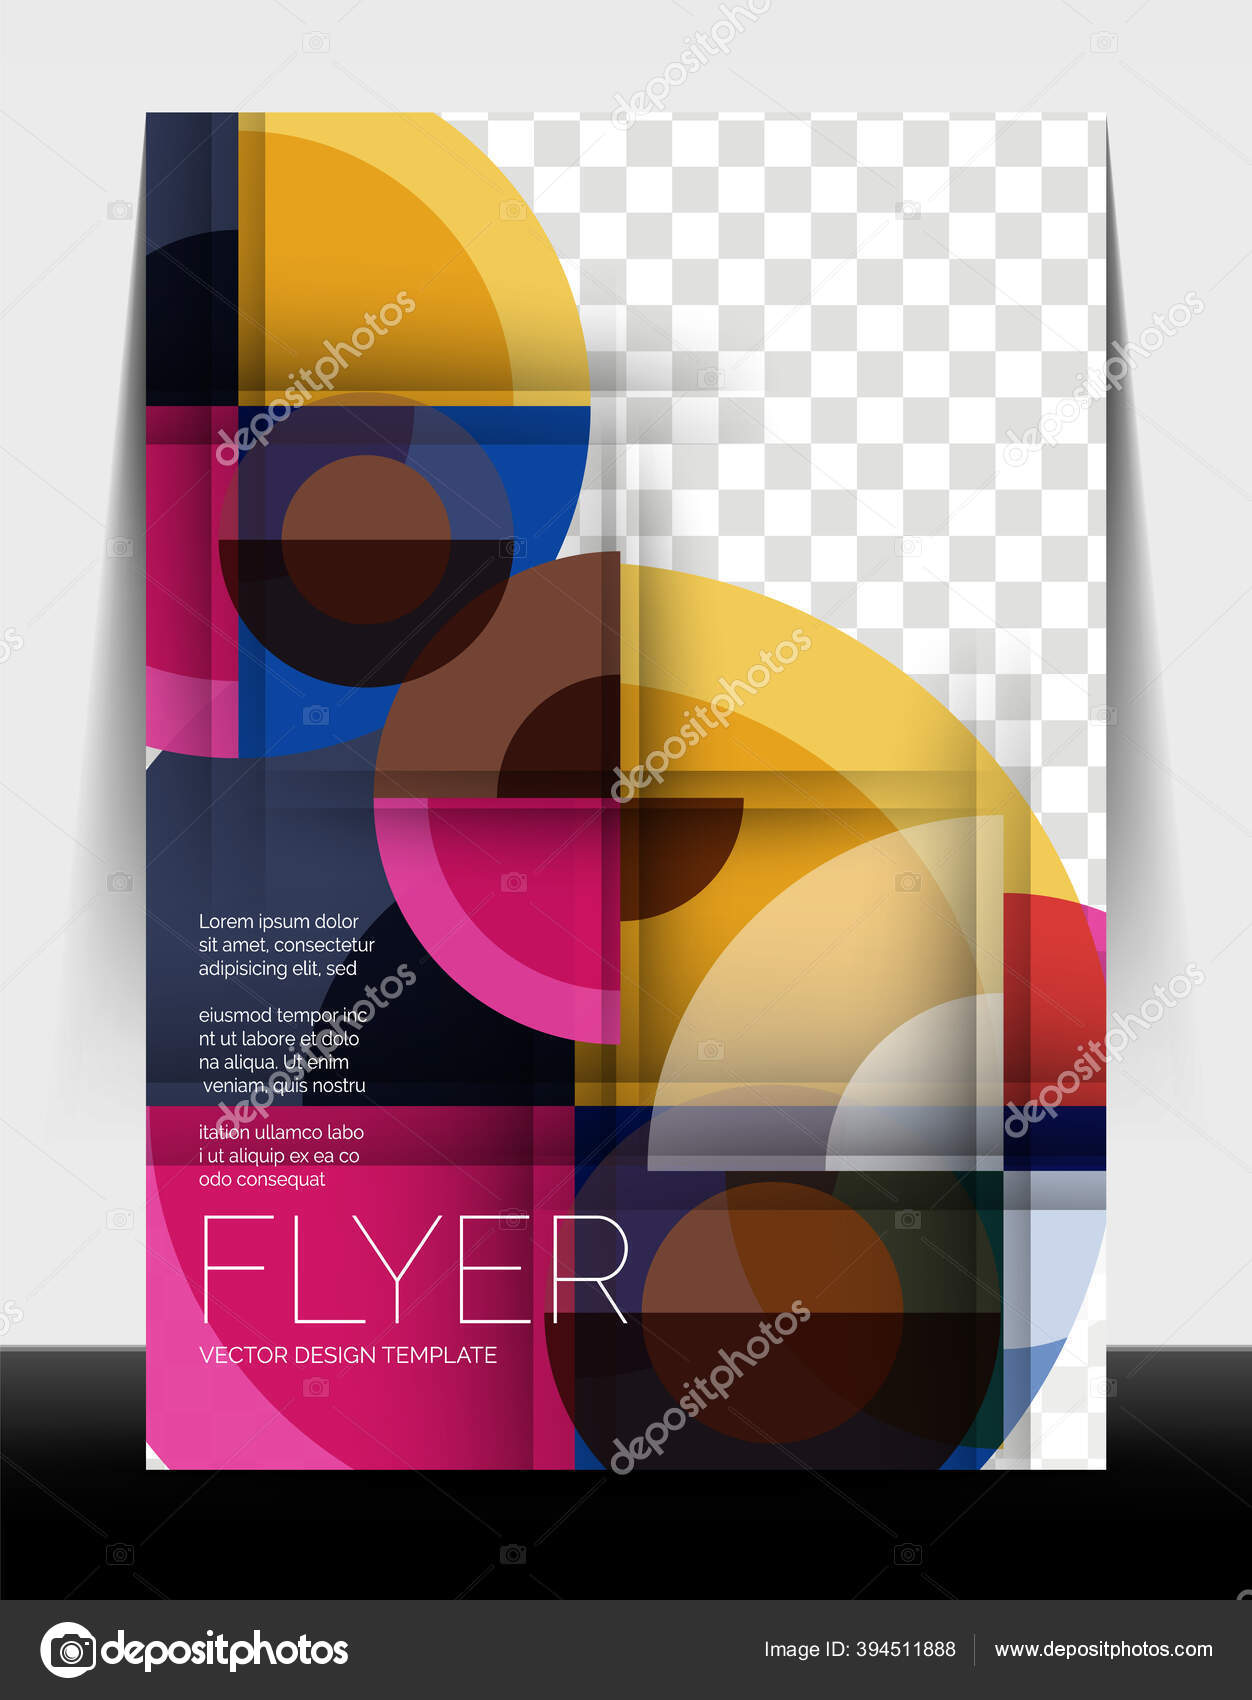 Flyer Annual Report Circle Design Vector Background Print Template Stock Vector C Akomov